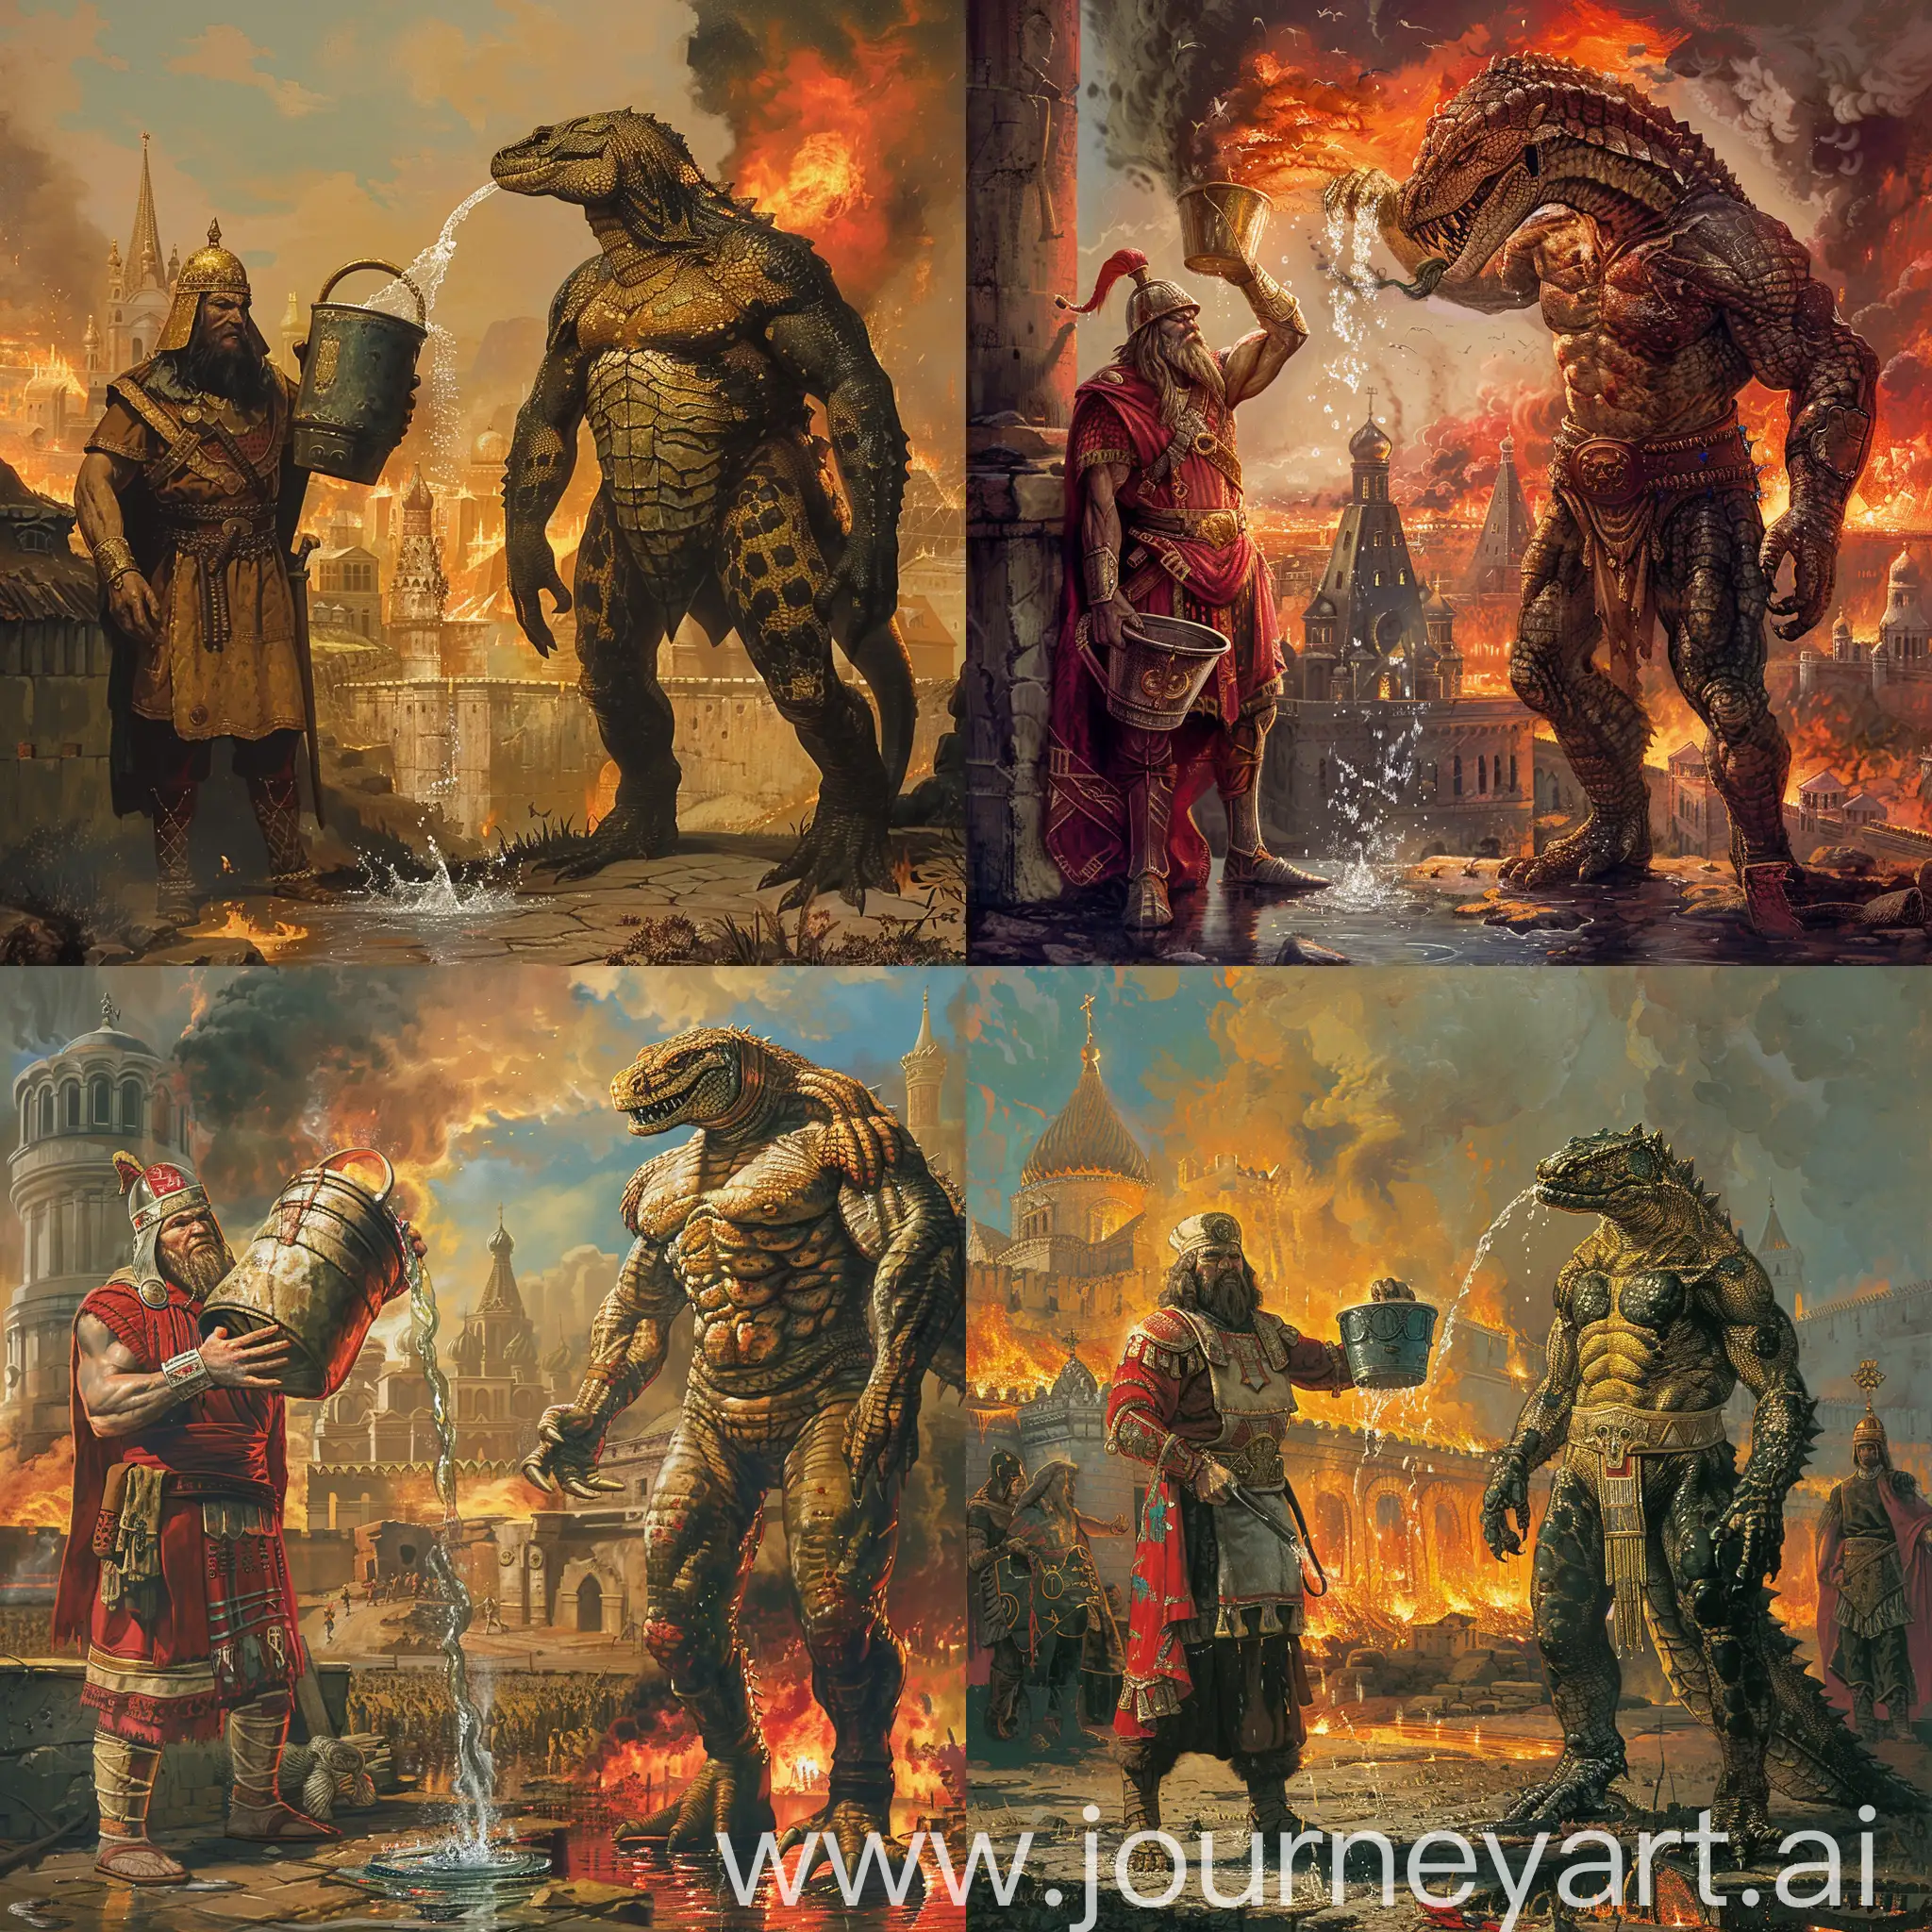 An ancient Russian hero stands on the left and pours water from a bucket, a muscular reptilian lizard monster that stands on the right, against the background of a burning ancien city